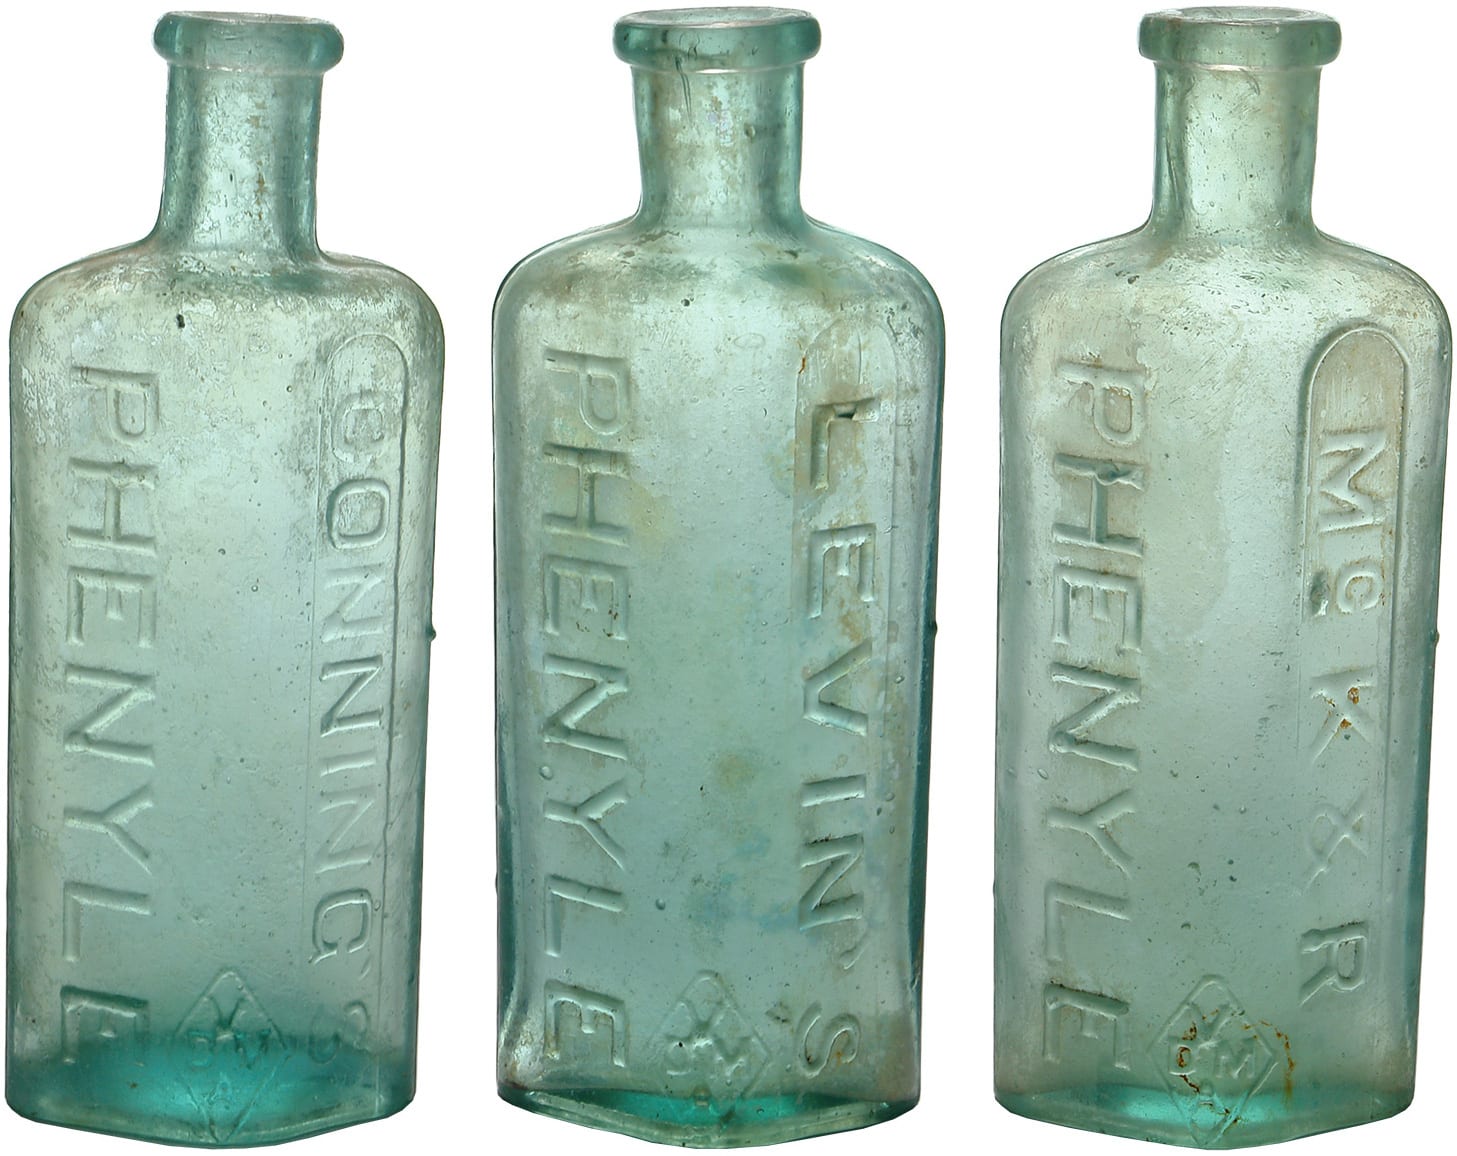 Collection Old Phenyle Poison Bottles